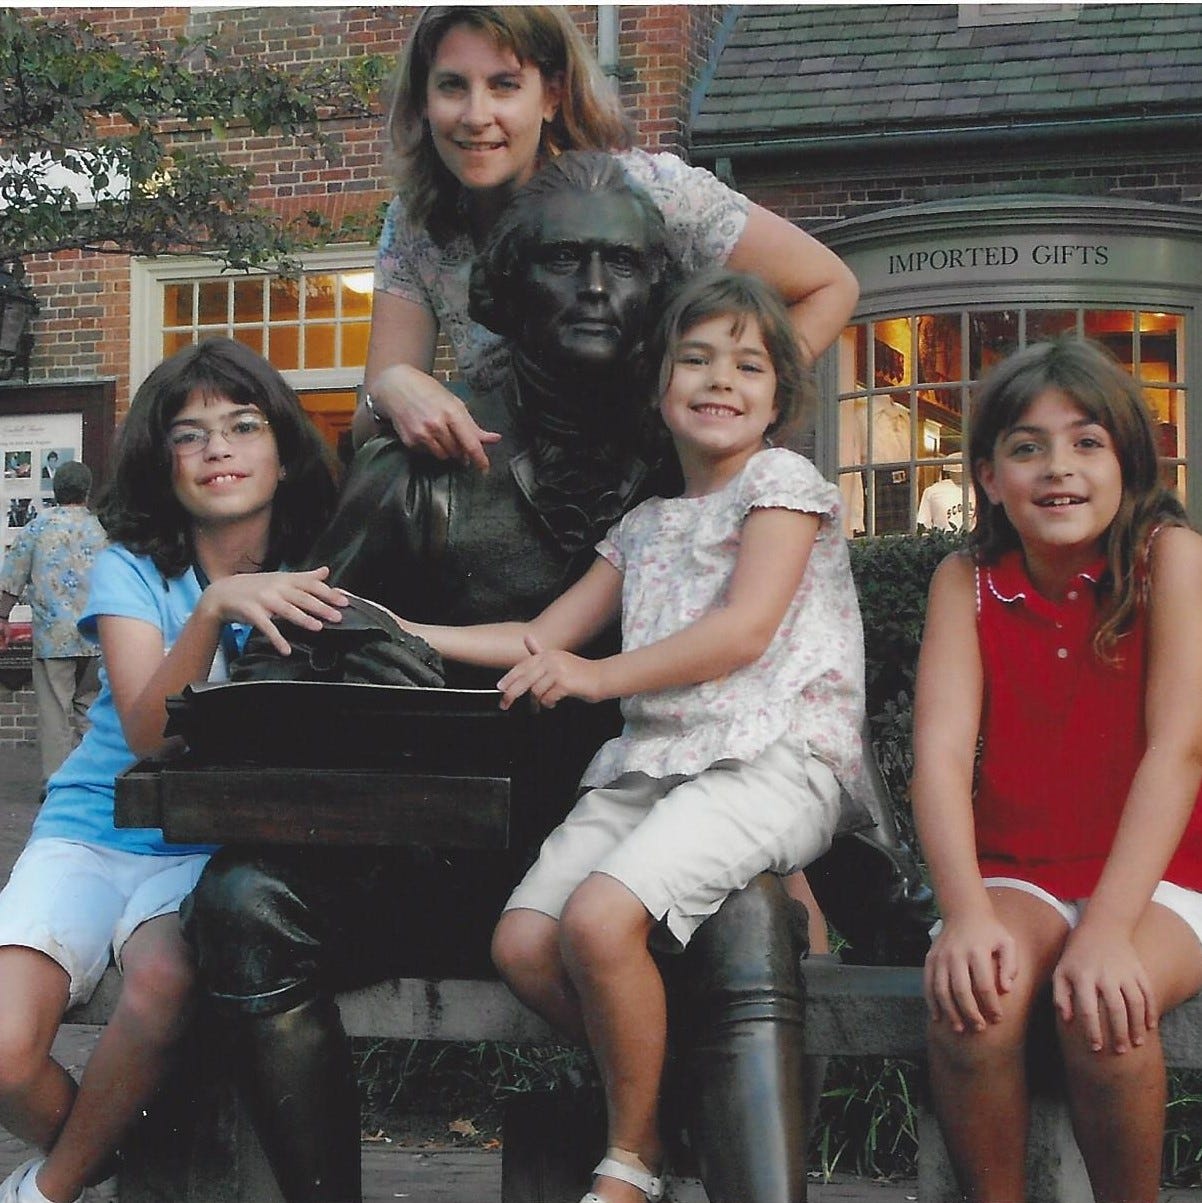 Family posed by a life-sized statue of Thomas Jefferson in Williamsburg, VA.